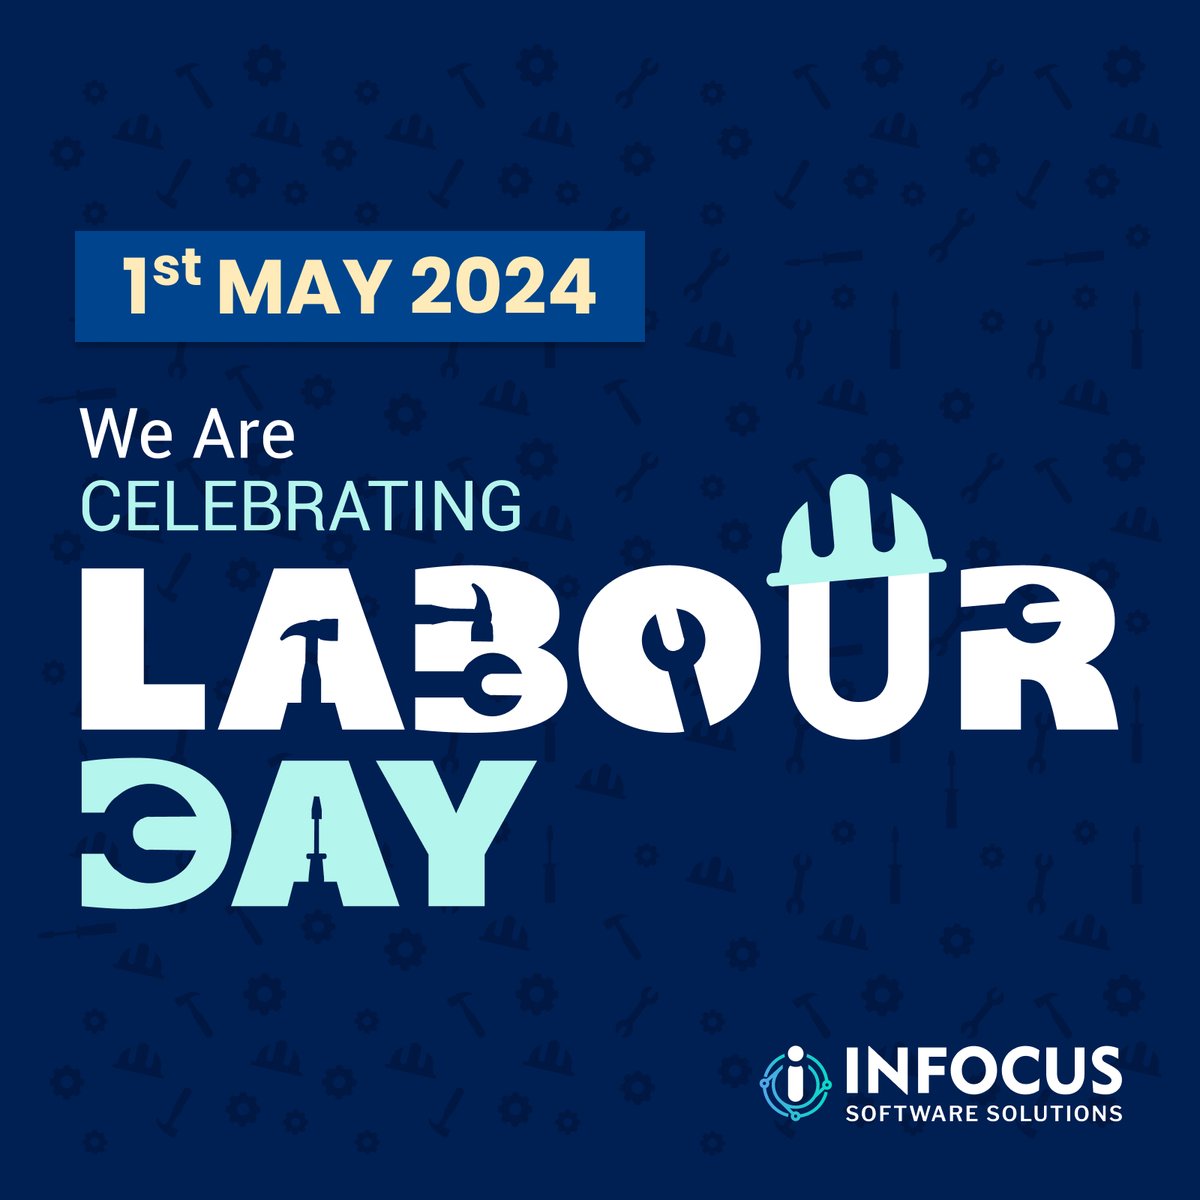 #LabourDay2024 #MayDay #wishes #respect 

#infocussoftwaresolutions